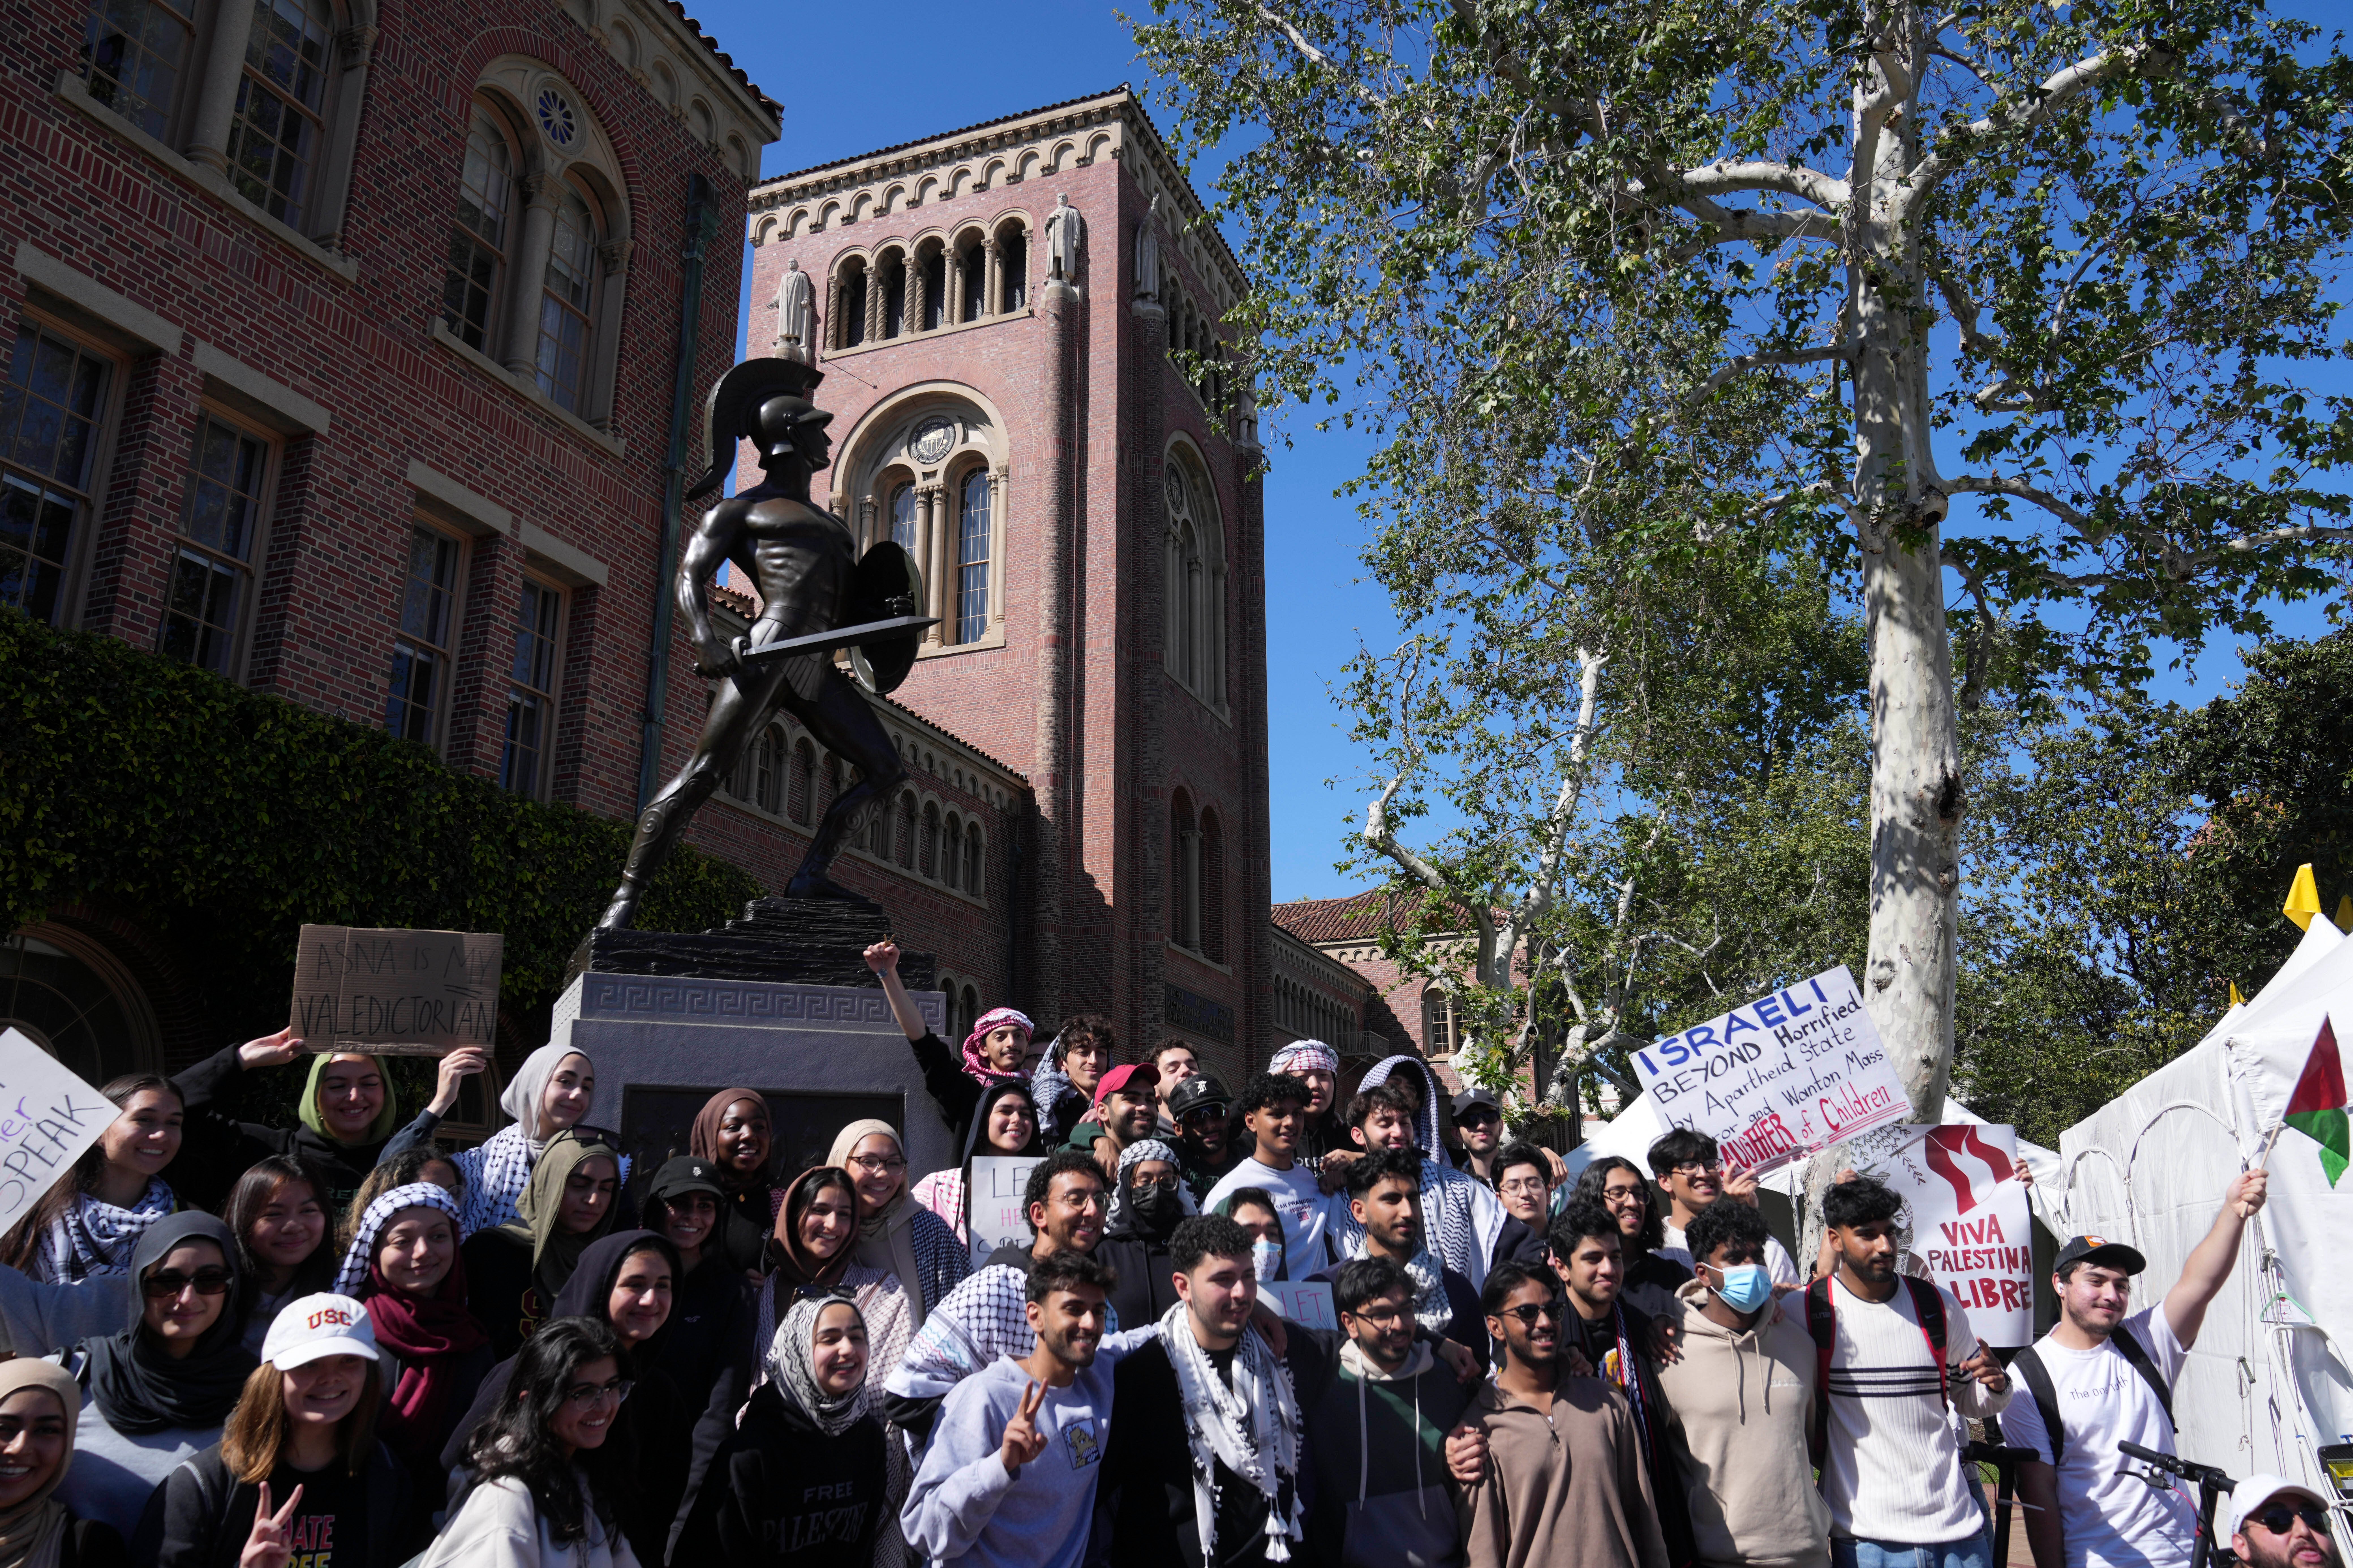 Pro-Palestinian students pose for photos in front of the Tommy Trojan statue on the campus of the University of Southern California